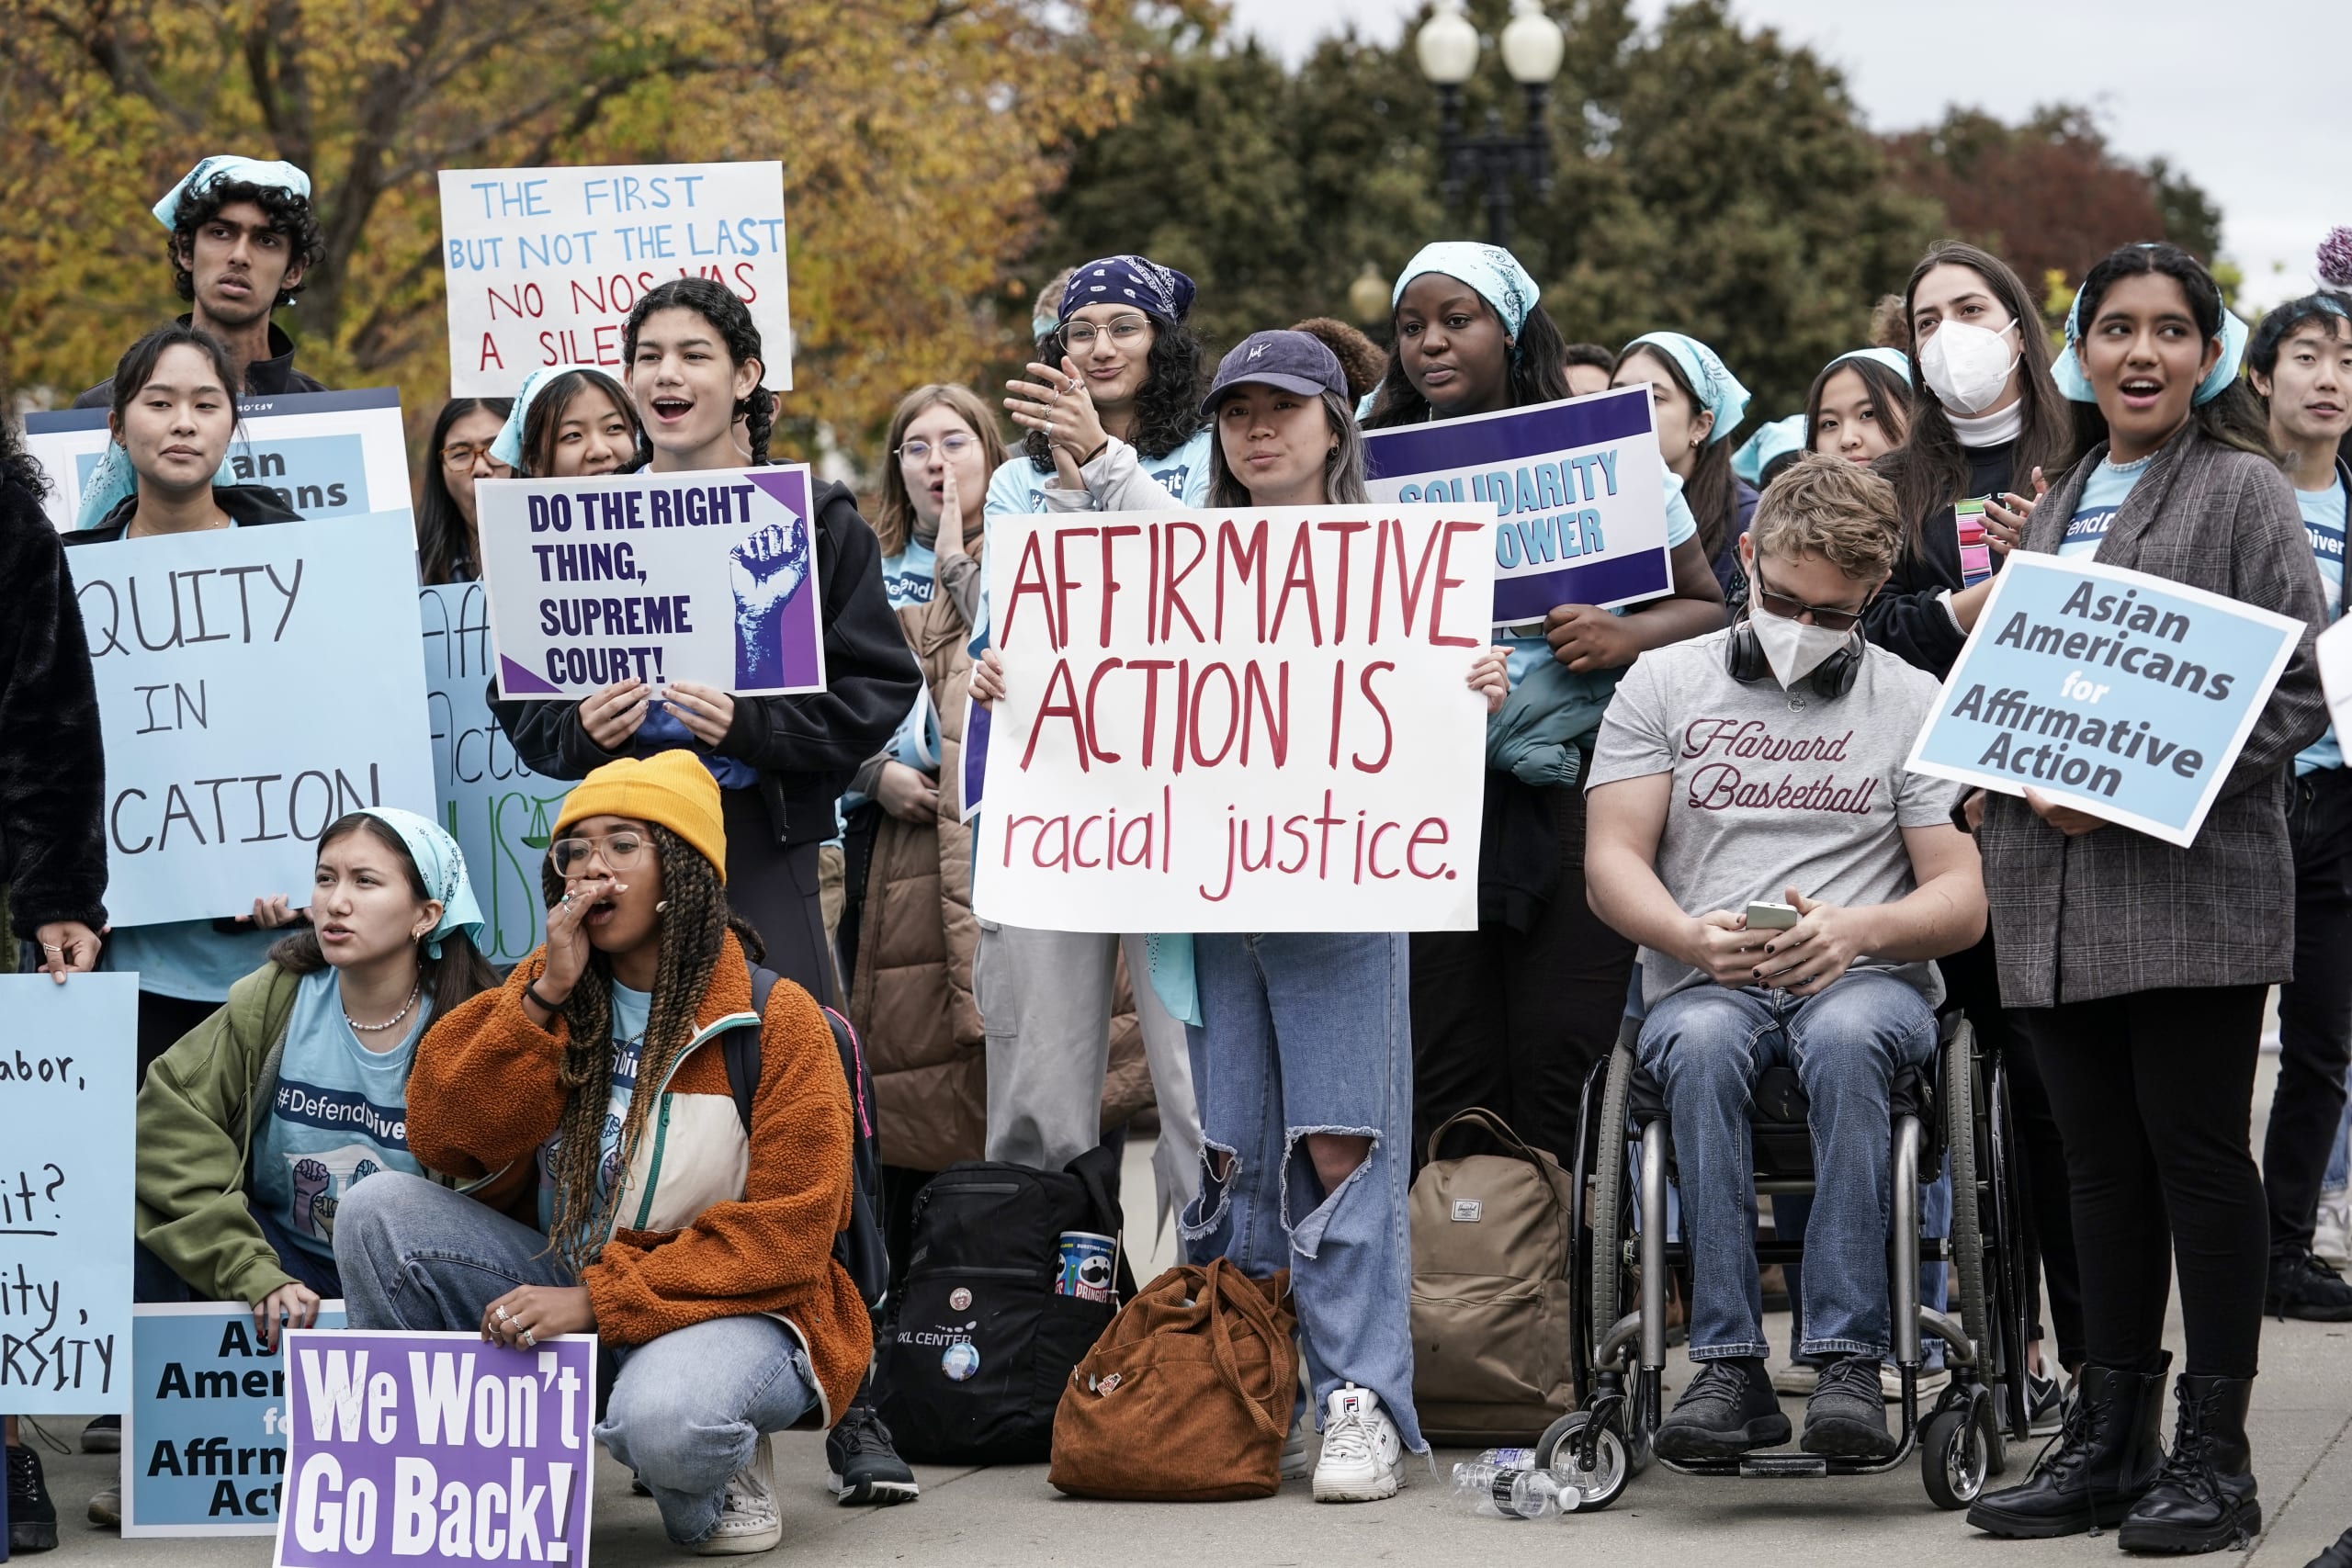 With a conservative majority, affirmative action on the chopping block at the Supreme Court